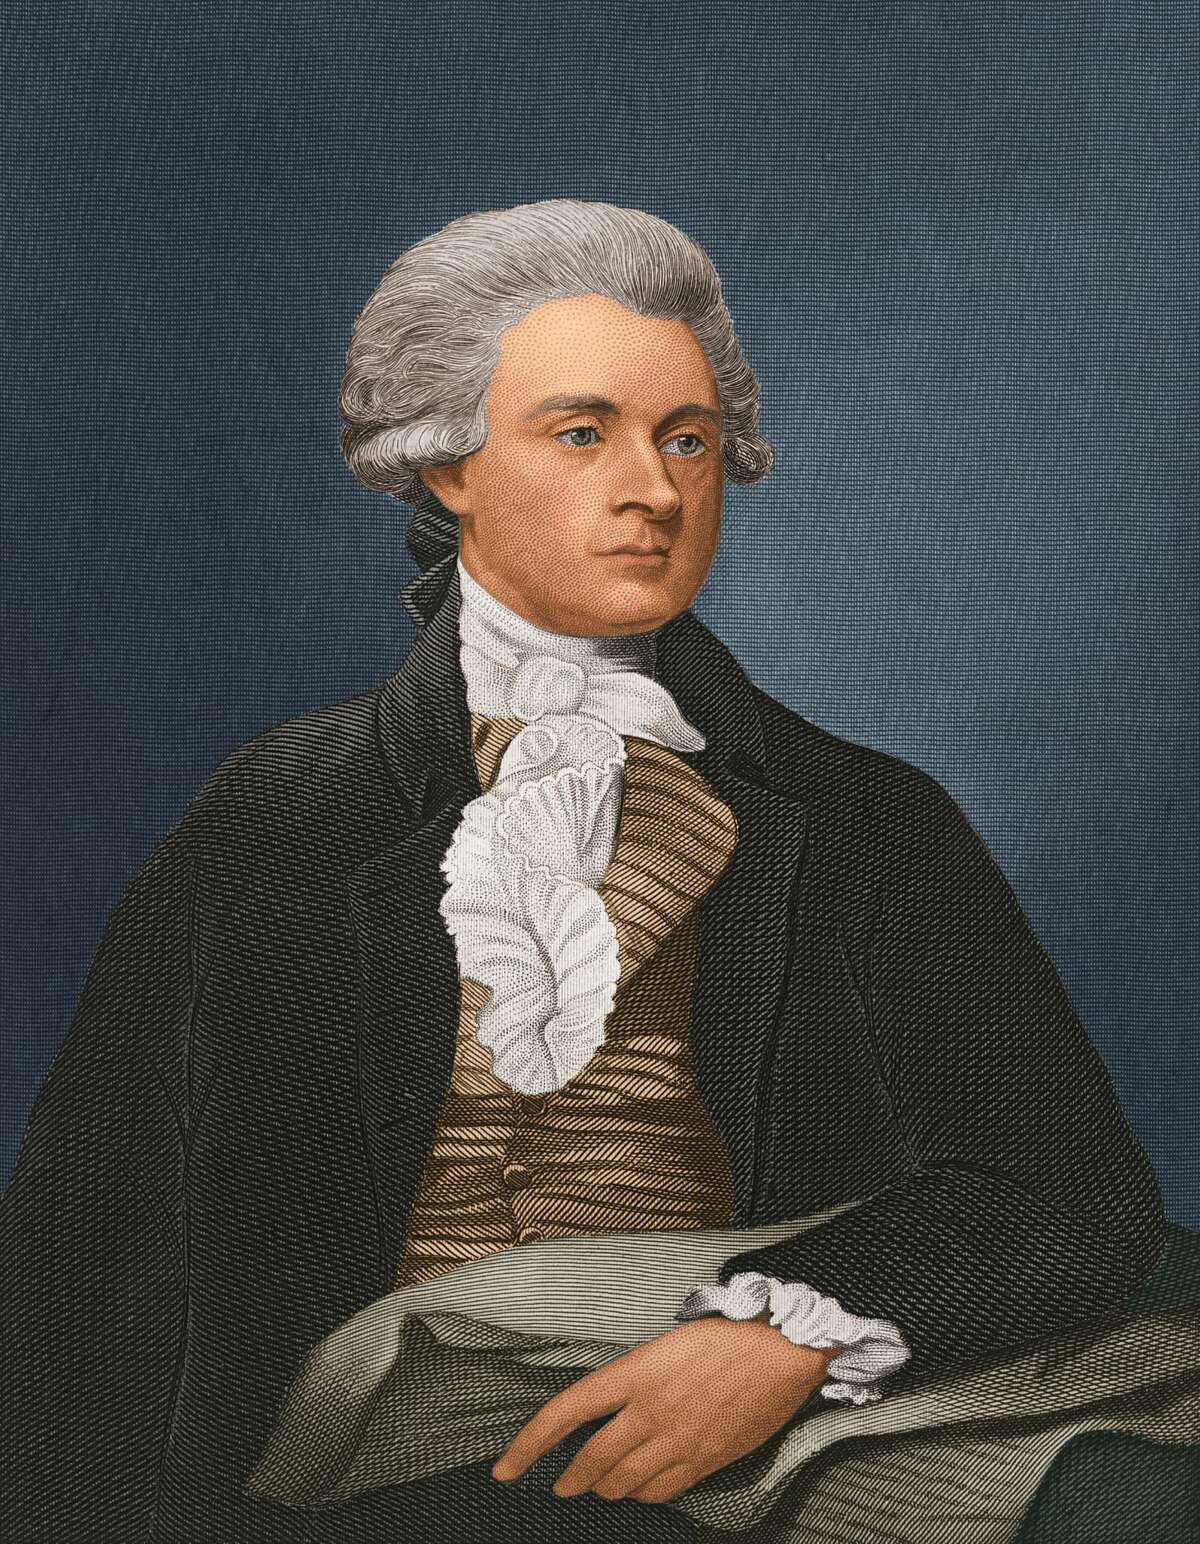 President Thomas Jefferson, who founded the University of Virginia, owned hundreds of slaves. He is believed to have fathered a child with one of his slaves, Sally Hemmings. But he also wrote most of the Declaration of Independence, including the words, "We hold these truths to be self-evident, that all men are created equal, that they are endowed by their Creator with certain unalienable Rights, that among these are Life, Liberty and the pursuit of Happiness."